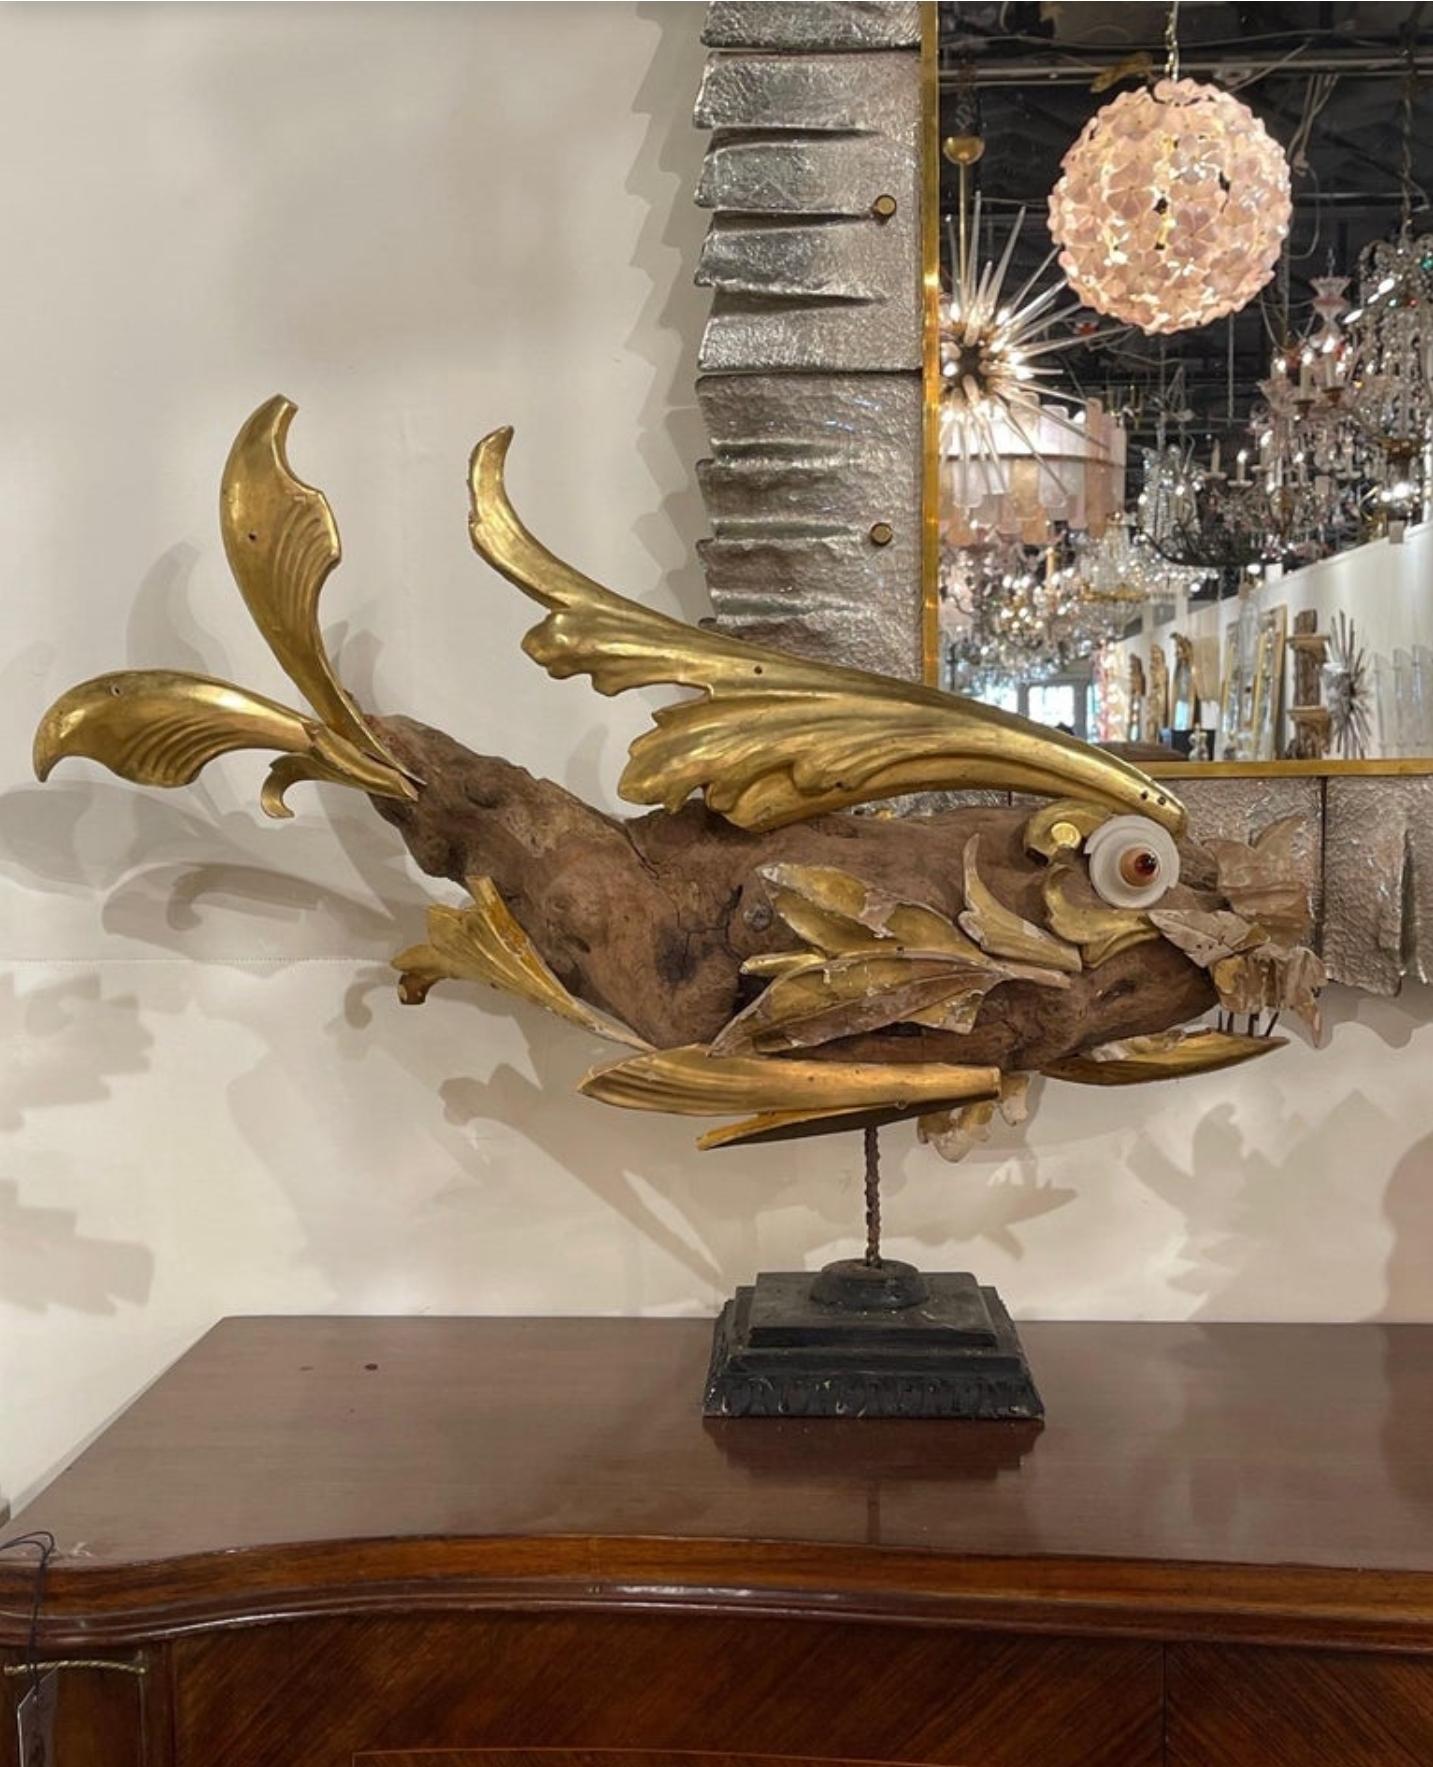 A fabulous large Italian folk art fish sculpture. Hand-crafted in the 21st century using found 18th and 19th century architectural fragments and decorative antique / vintage elements, including driftwood, shell, and carved giltwood, displayed on a